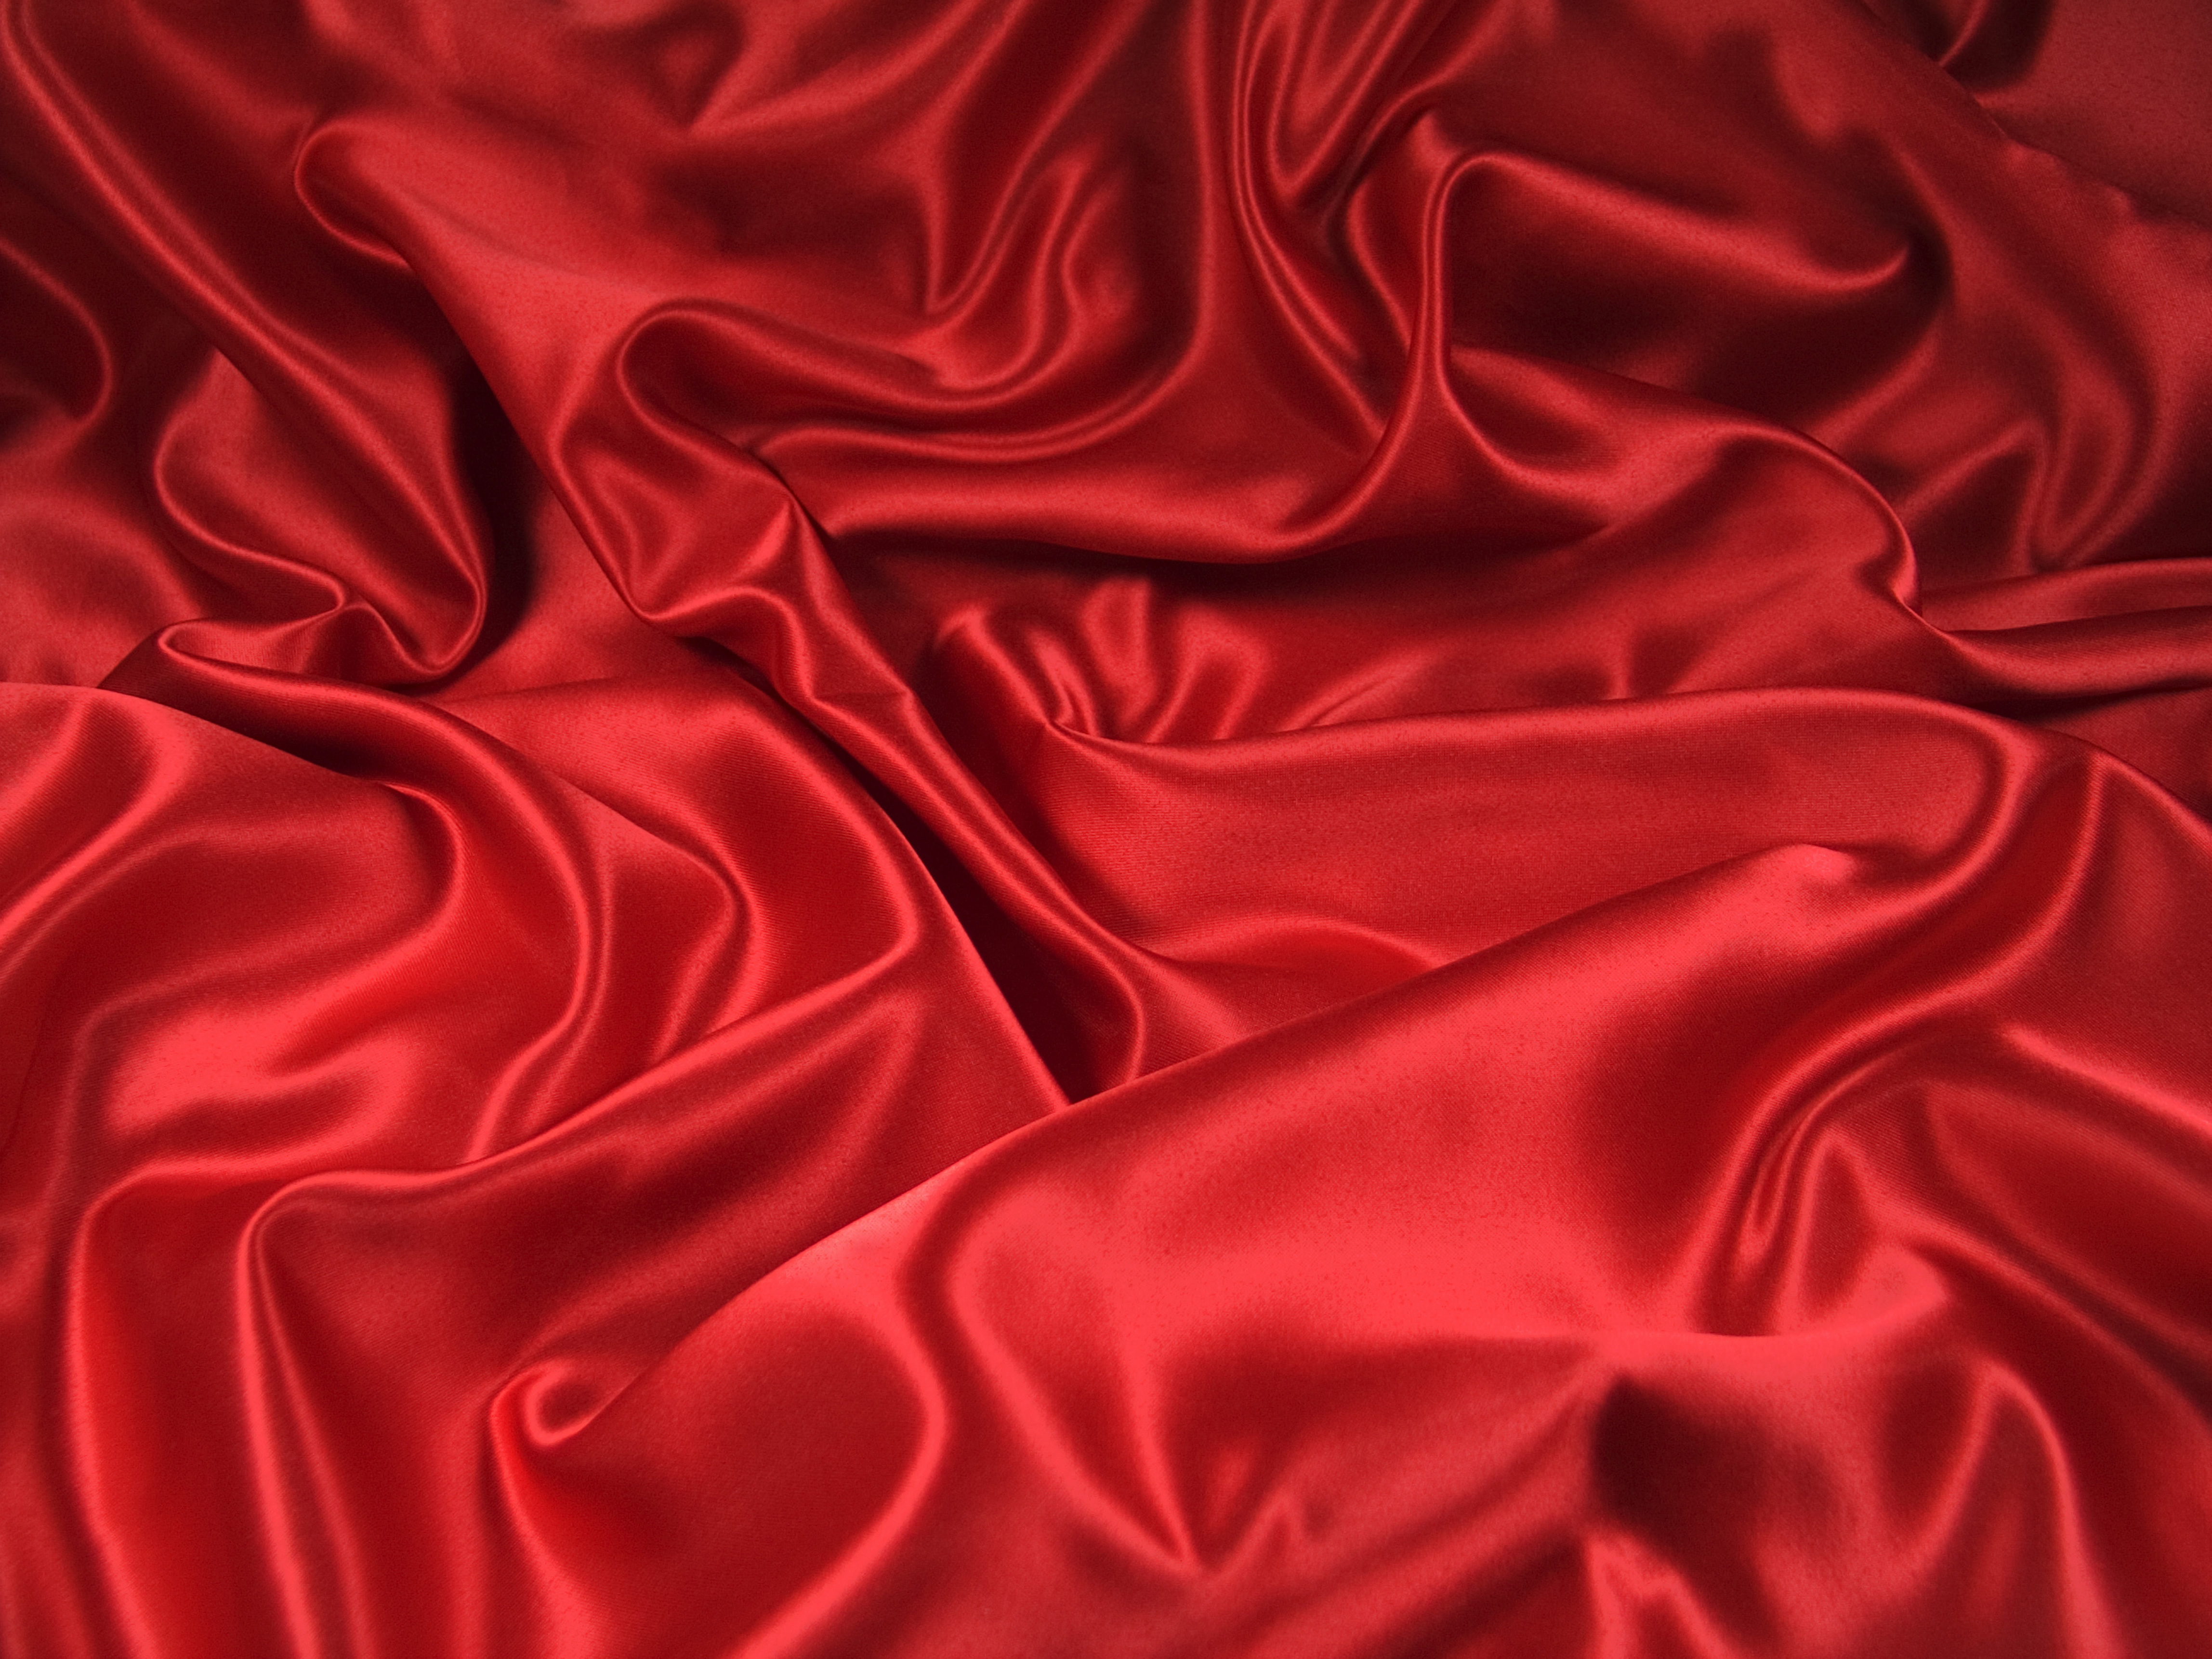 SIlk And Satin Wallpaper 50 images